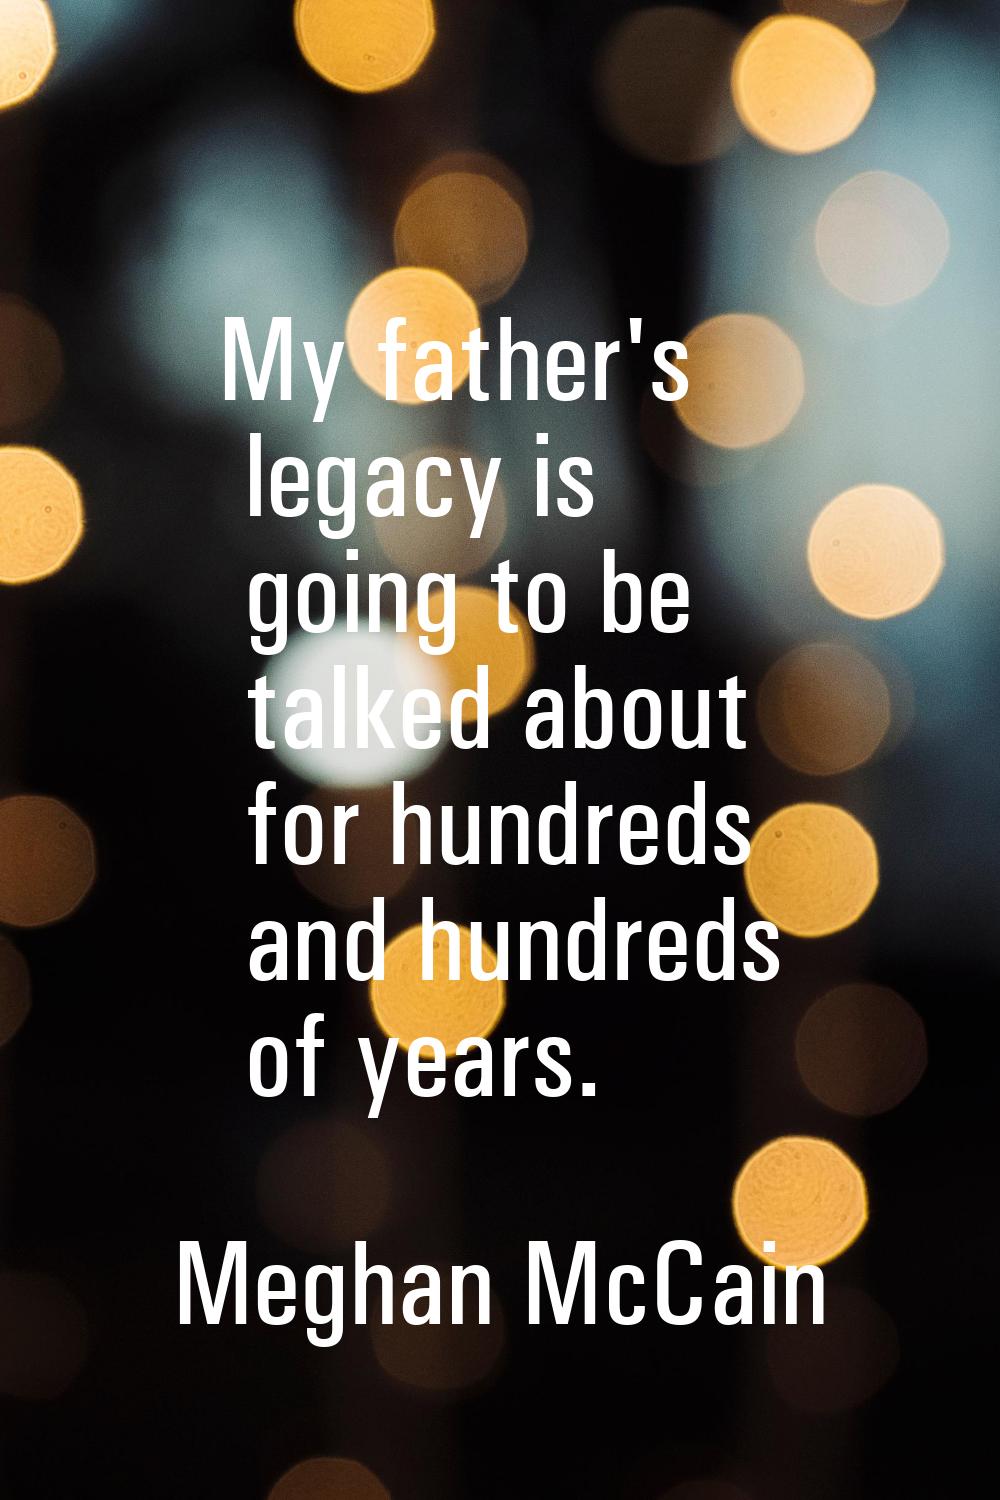 My father's legacy is going to be talked about for hundreds and hundreds of years.